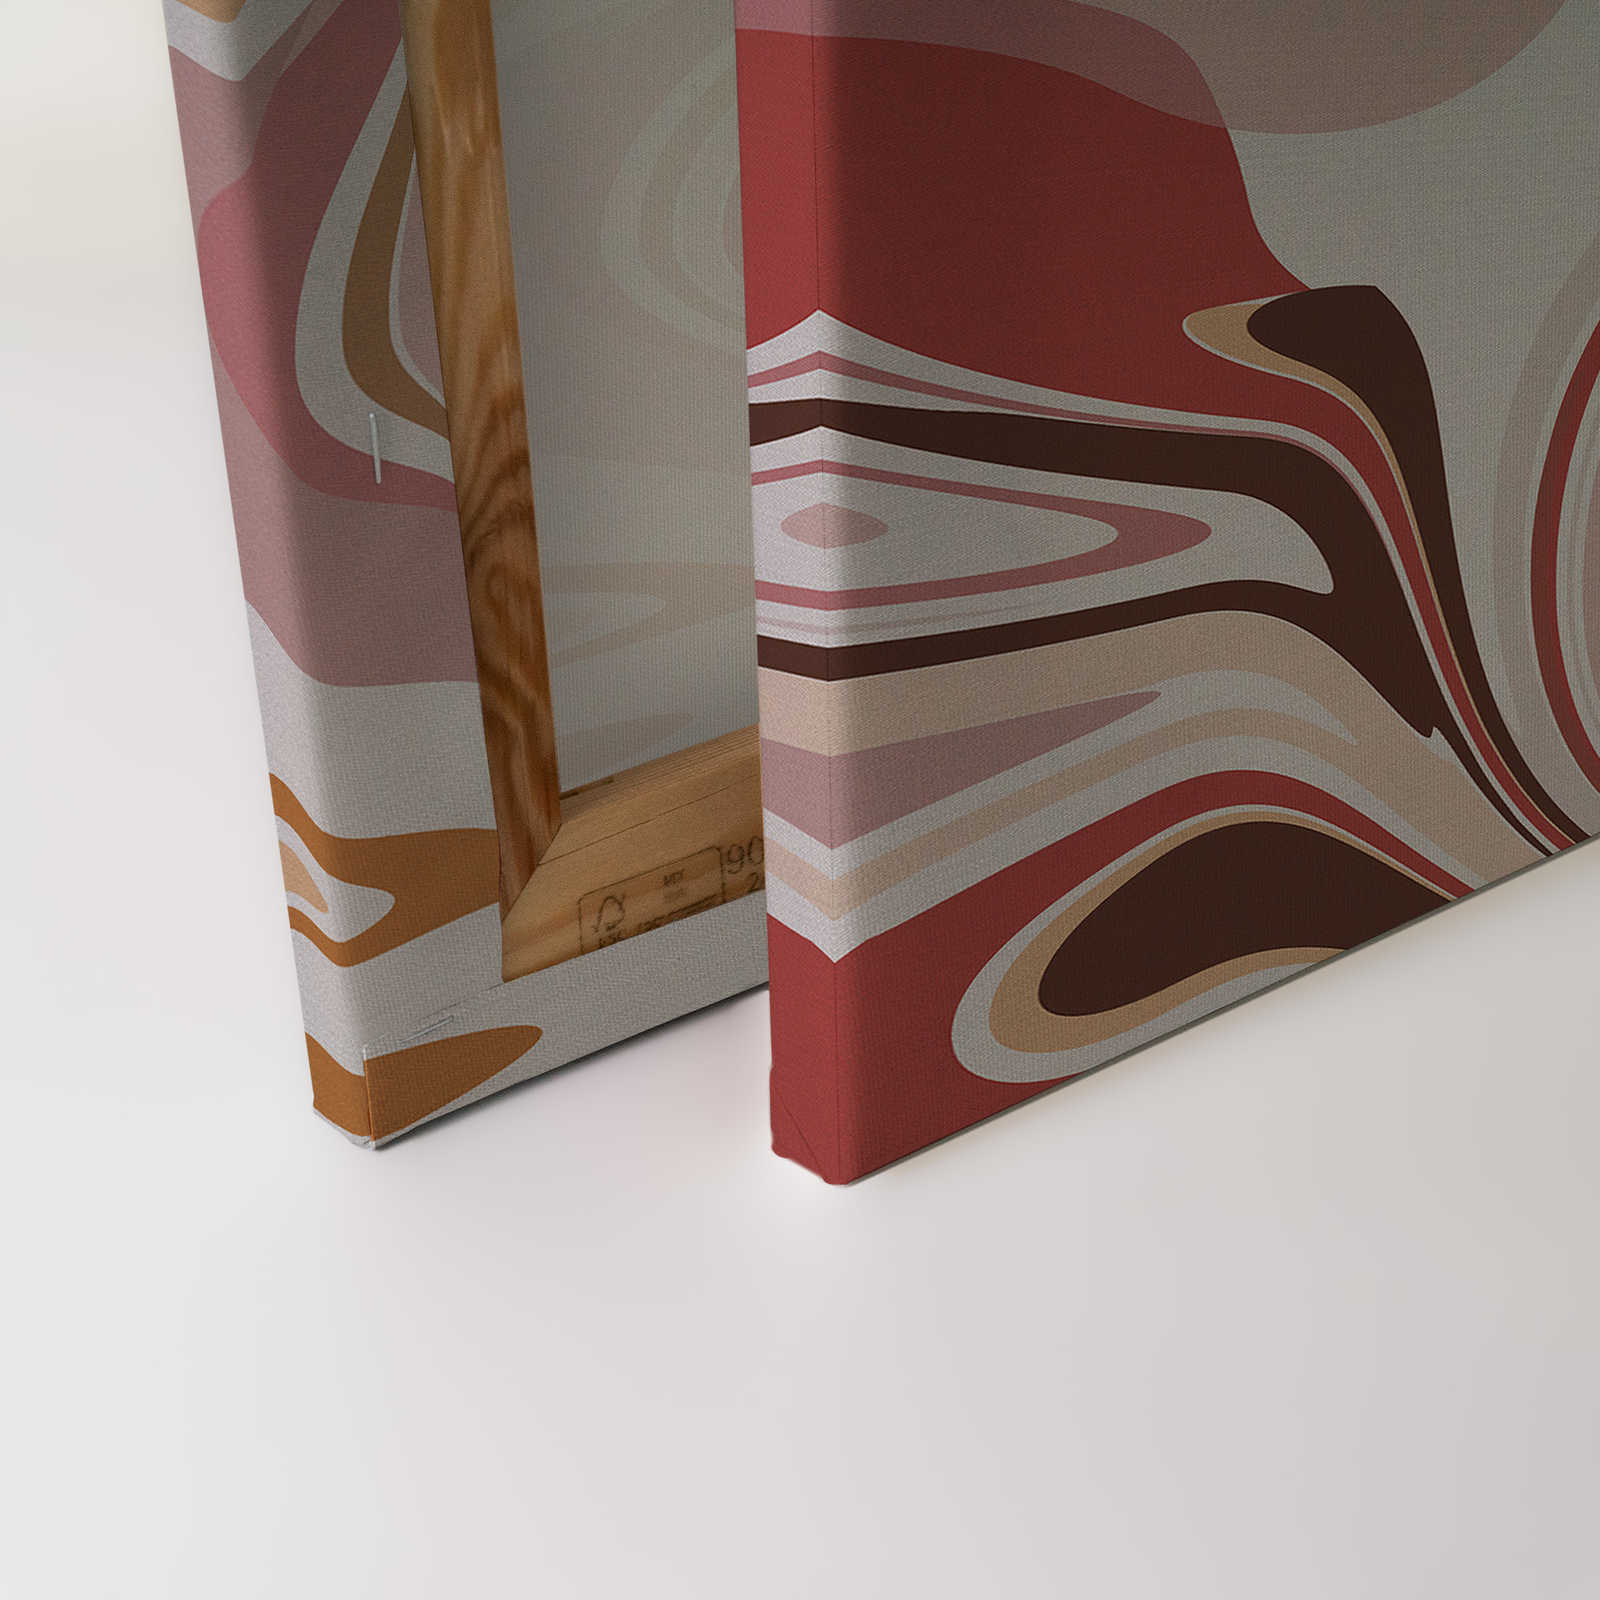             Canvas painting with abstract colour pattern in warm tones - 0.90 m x 0.60 m
        